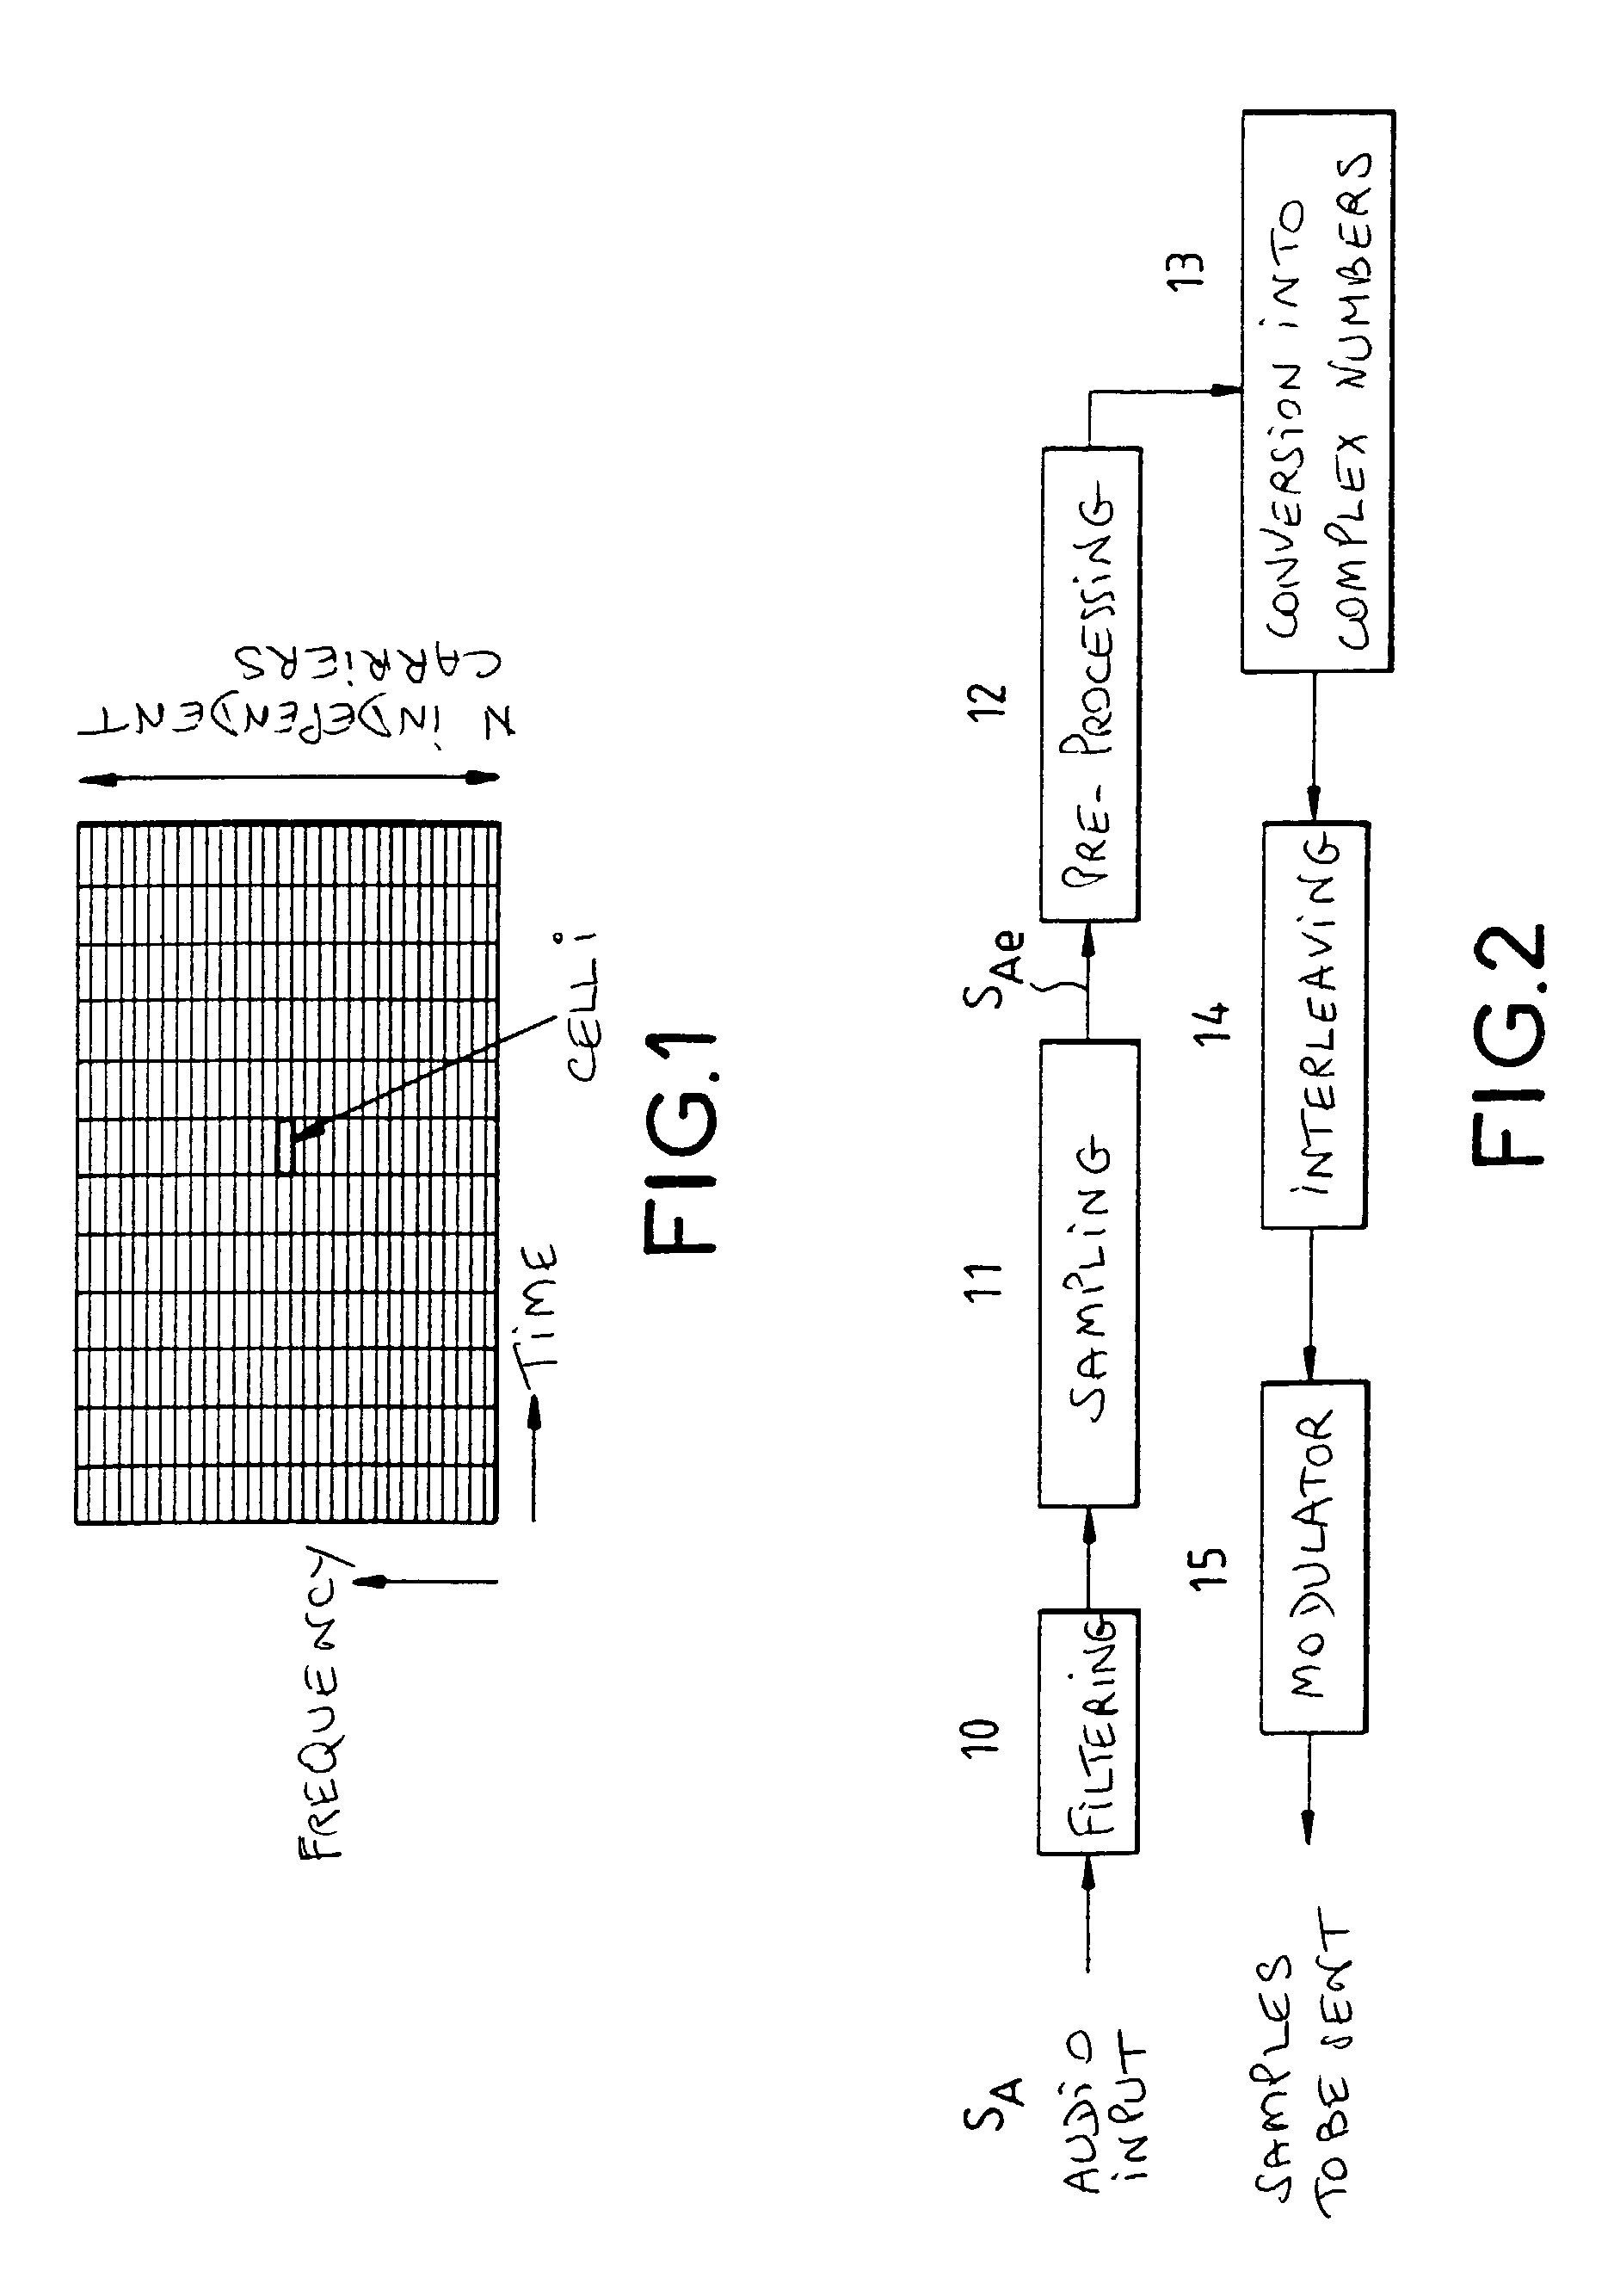 System and method for the transmission of an audio or speech signal